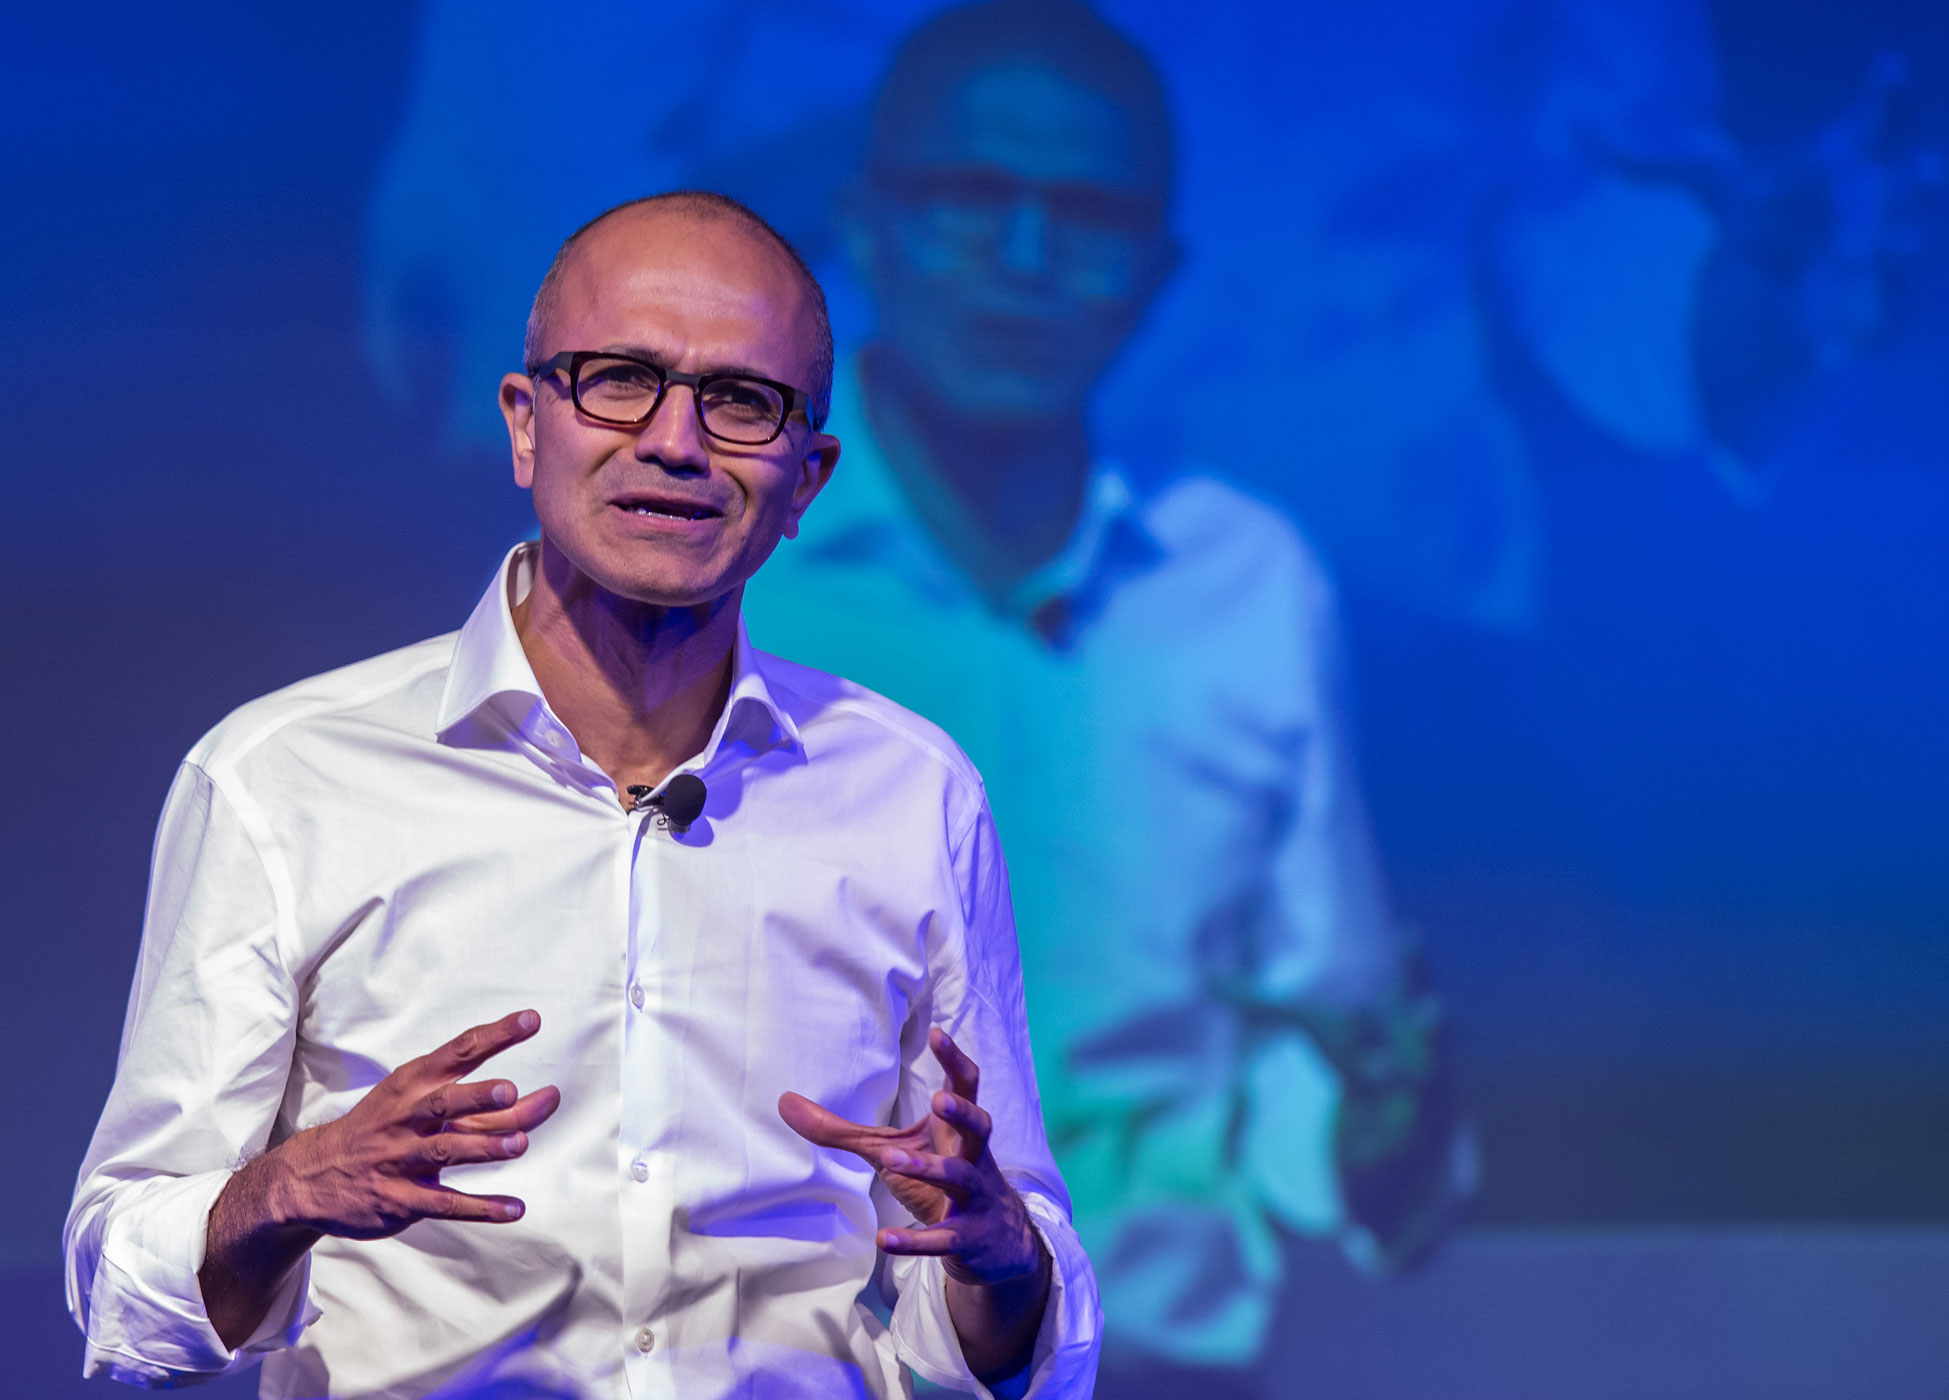 Satya Nadella, chief executive officer of Microsoft Corp., speaks to students during the Microsoft Talent India conference in New Delhi, India, on Tuesday, Sept. 30, 2014. (Graham Crouch—Bloomberg/Getty Images)